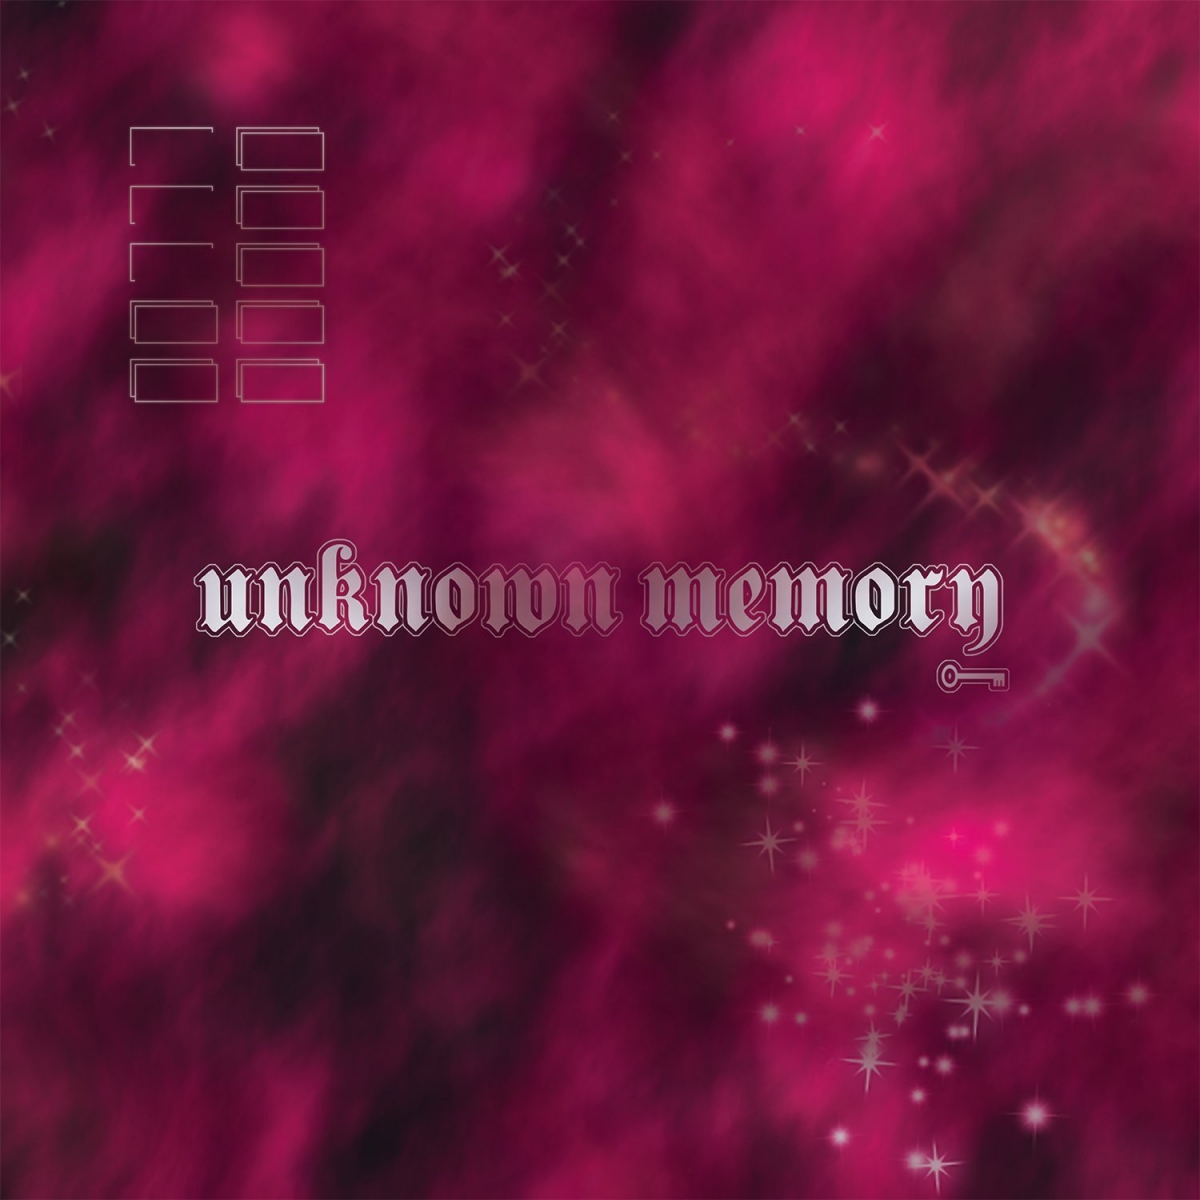 Unknown Memory by Yung Lean | Album Review